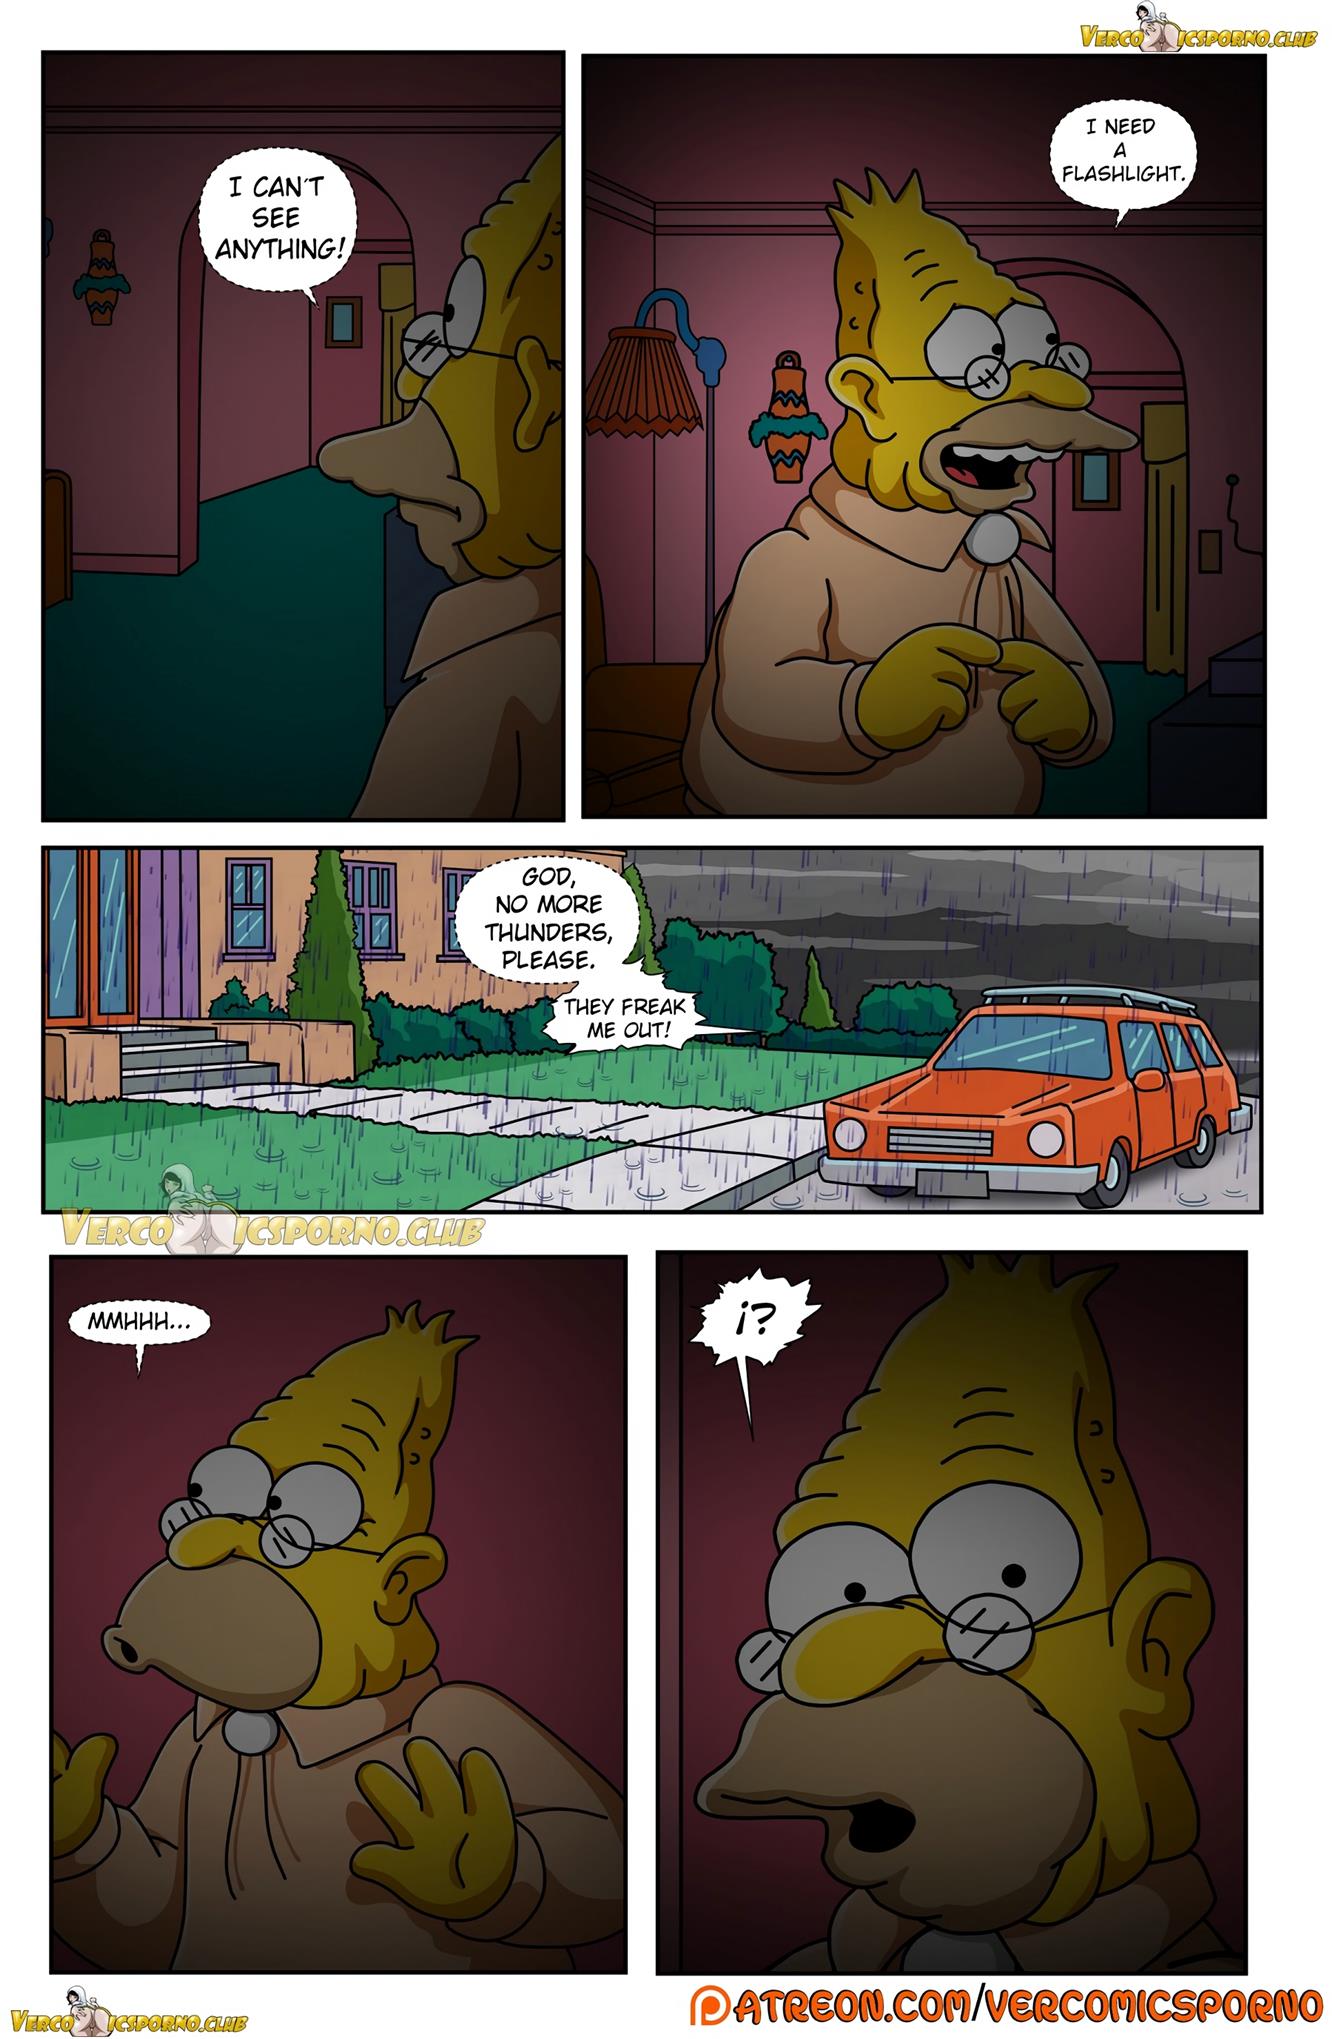 Grandpa and Me (The Simpsons)